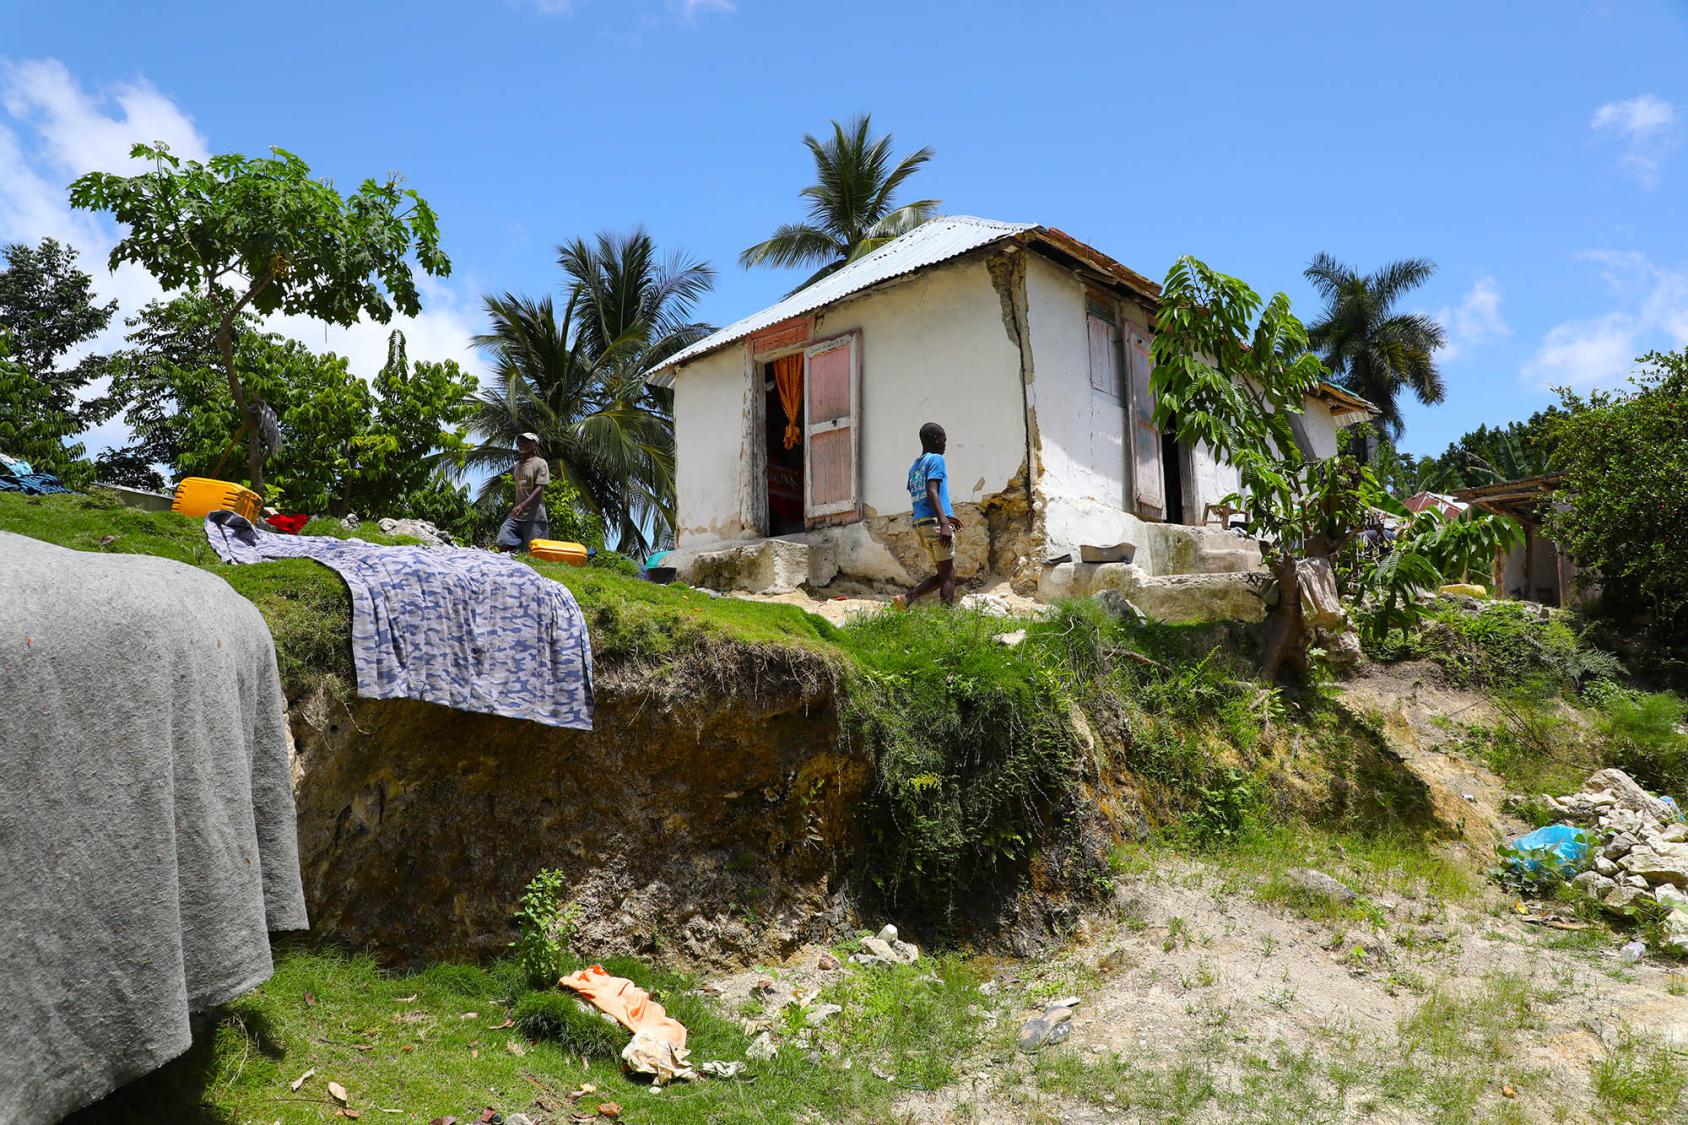 A person stands near a white home with several laundry items laid out to air dry on a hill. 